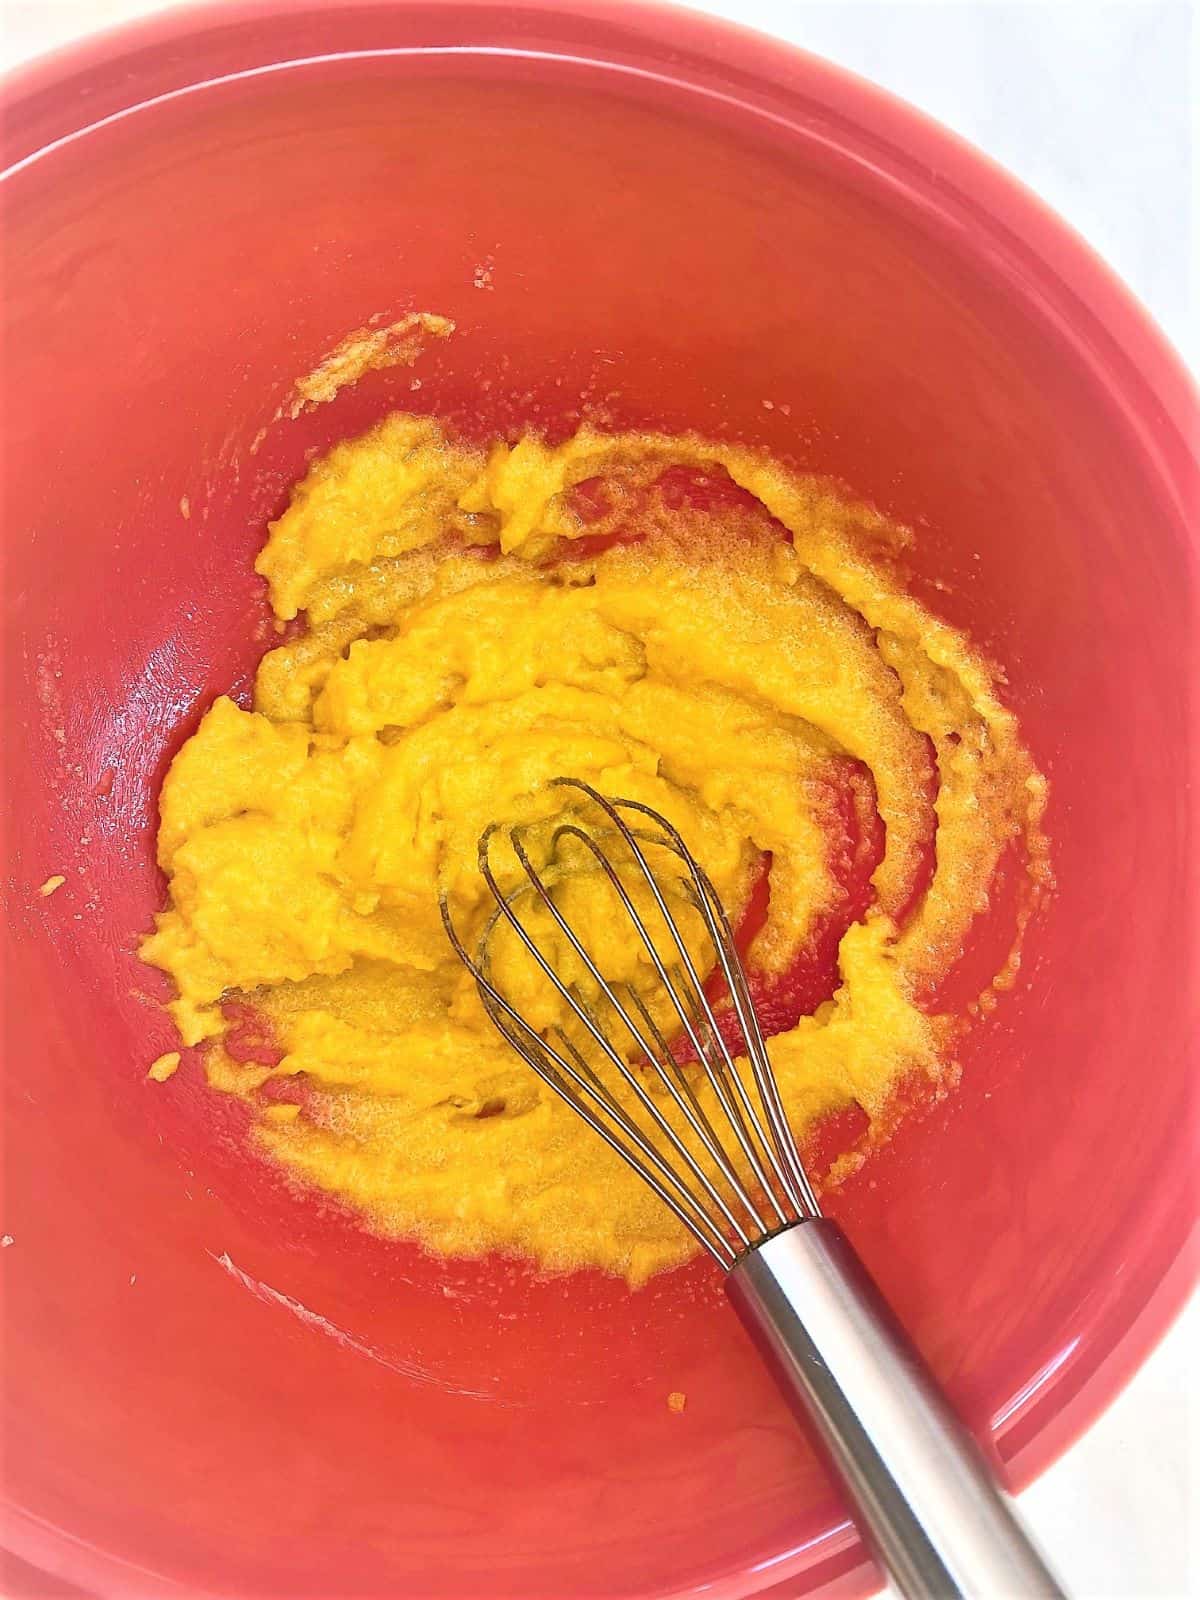 Bright yellow Egg yolk-sugar-butter mixture in red bowl with whisk